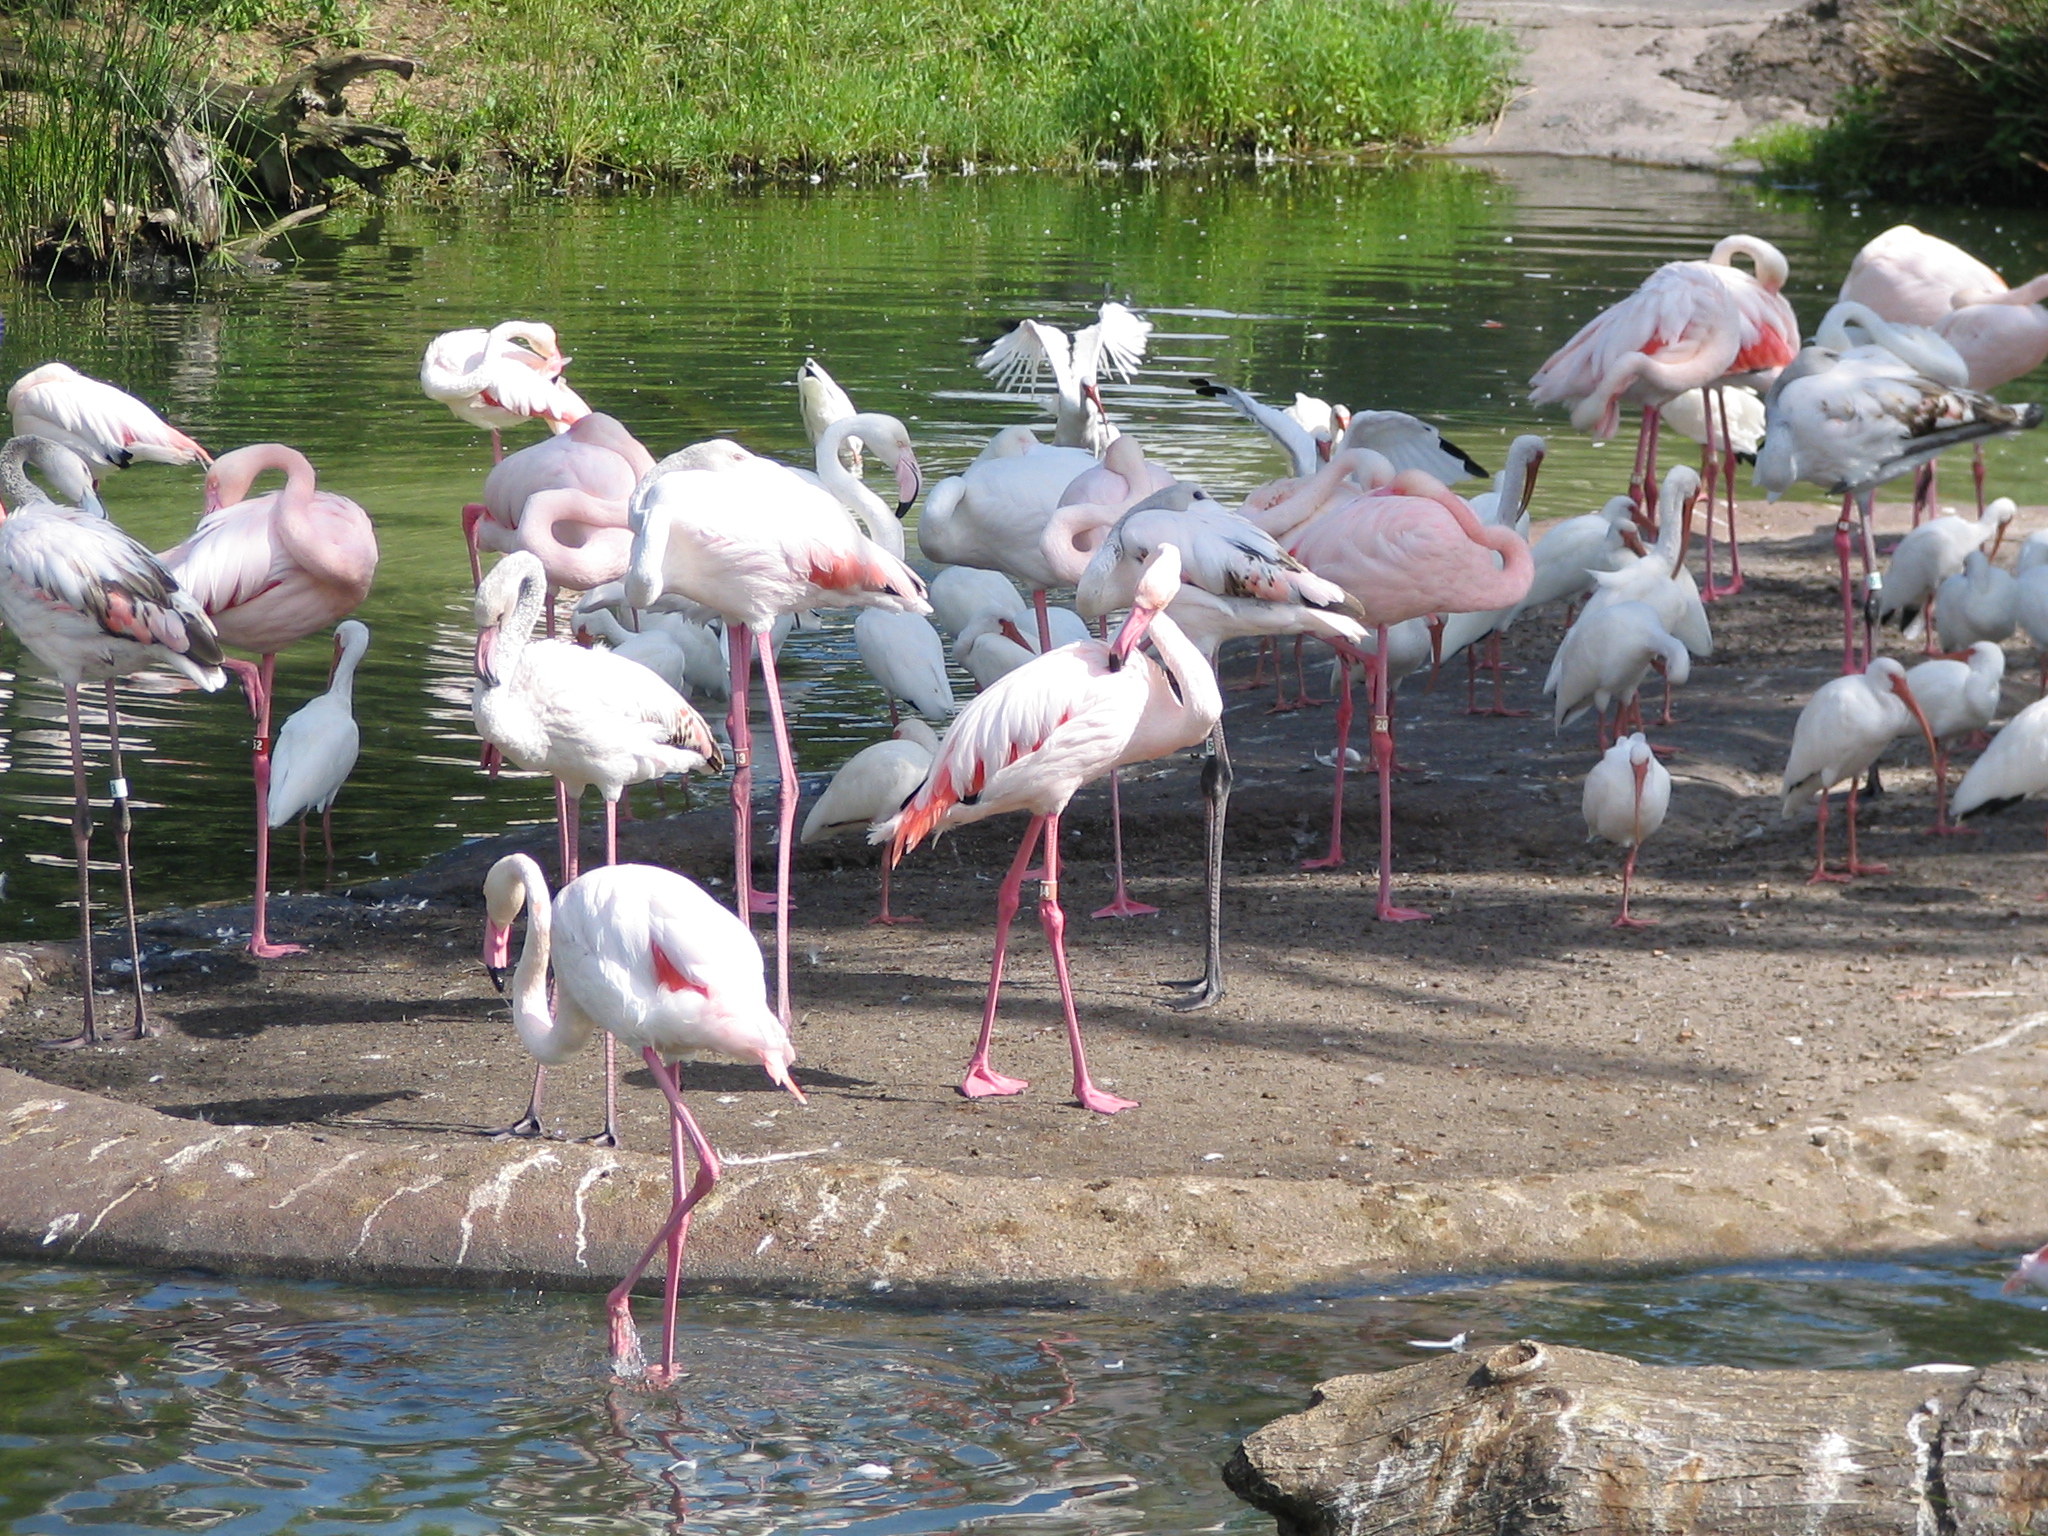 a flock of flamingos standing in a pond filled with water